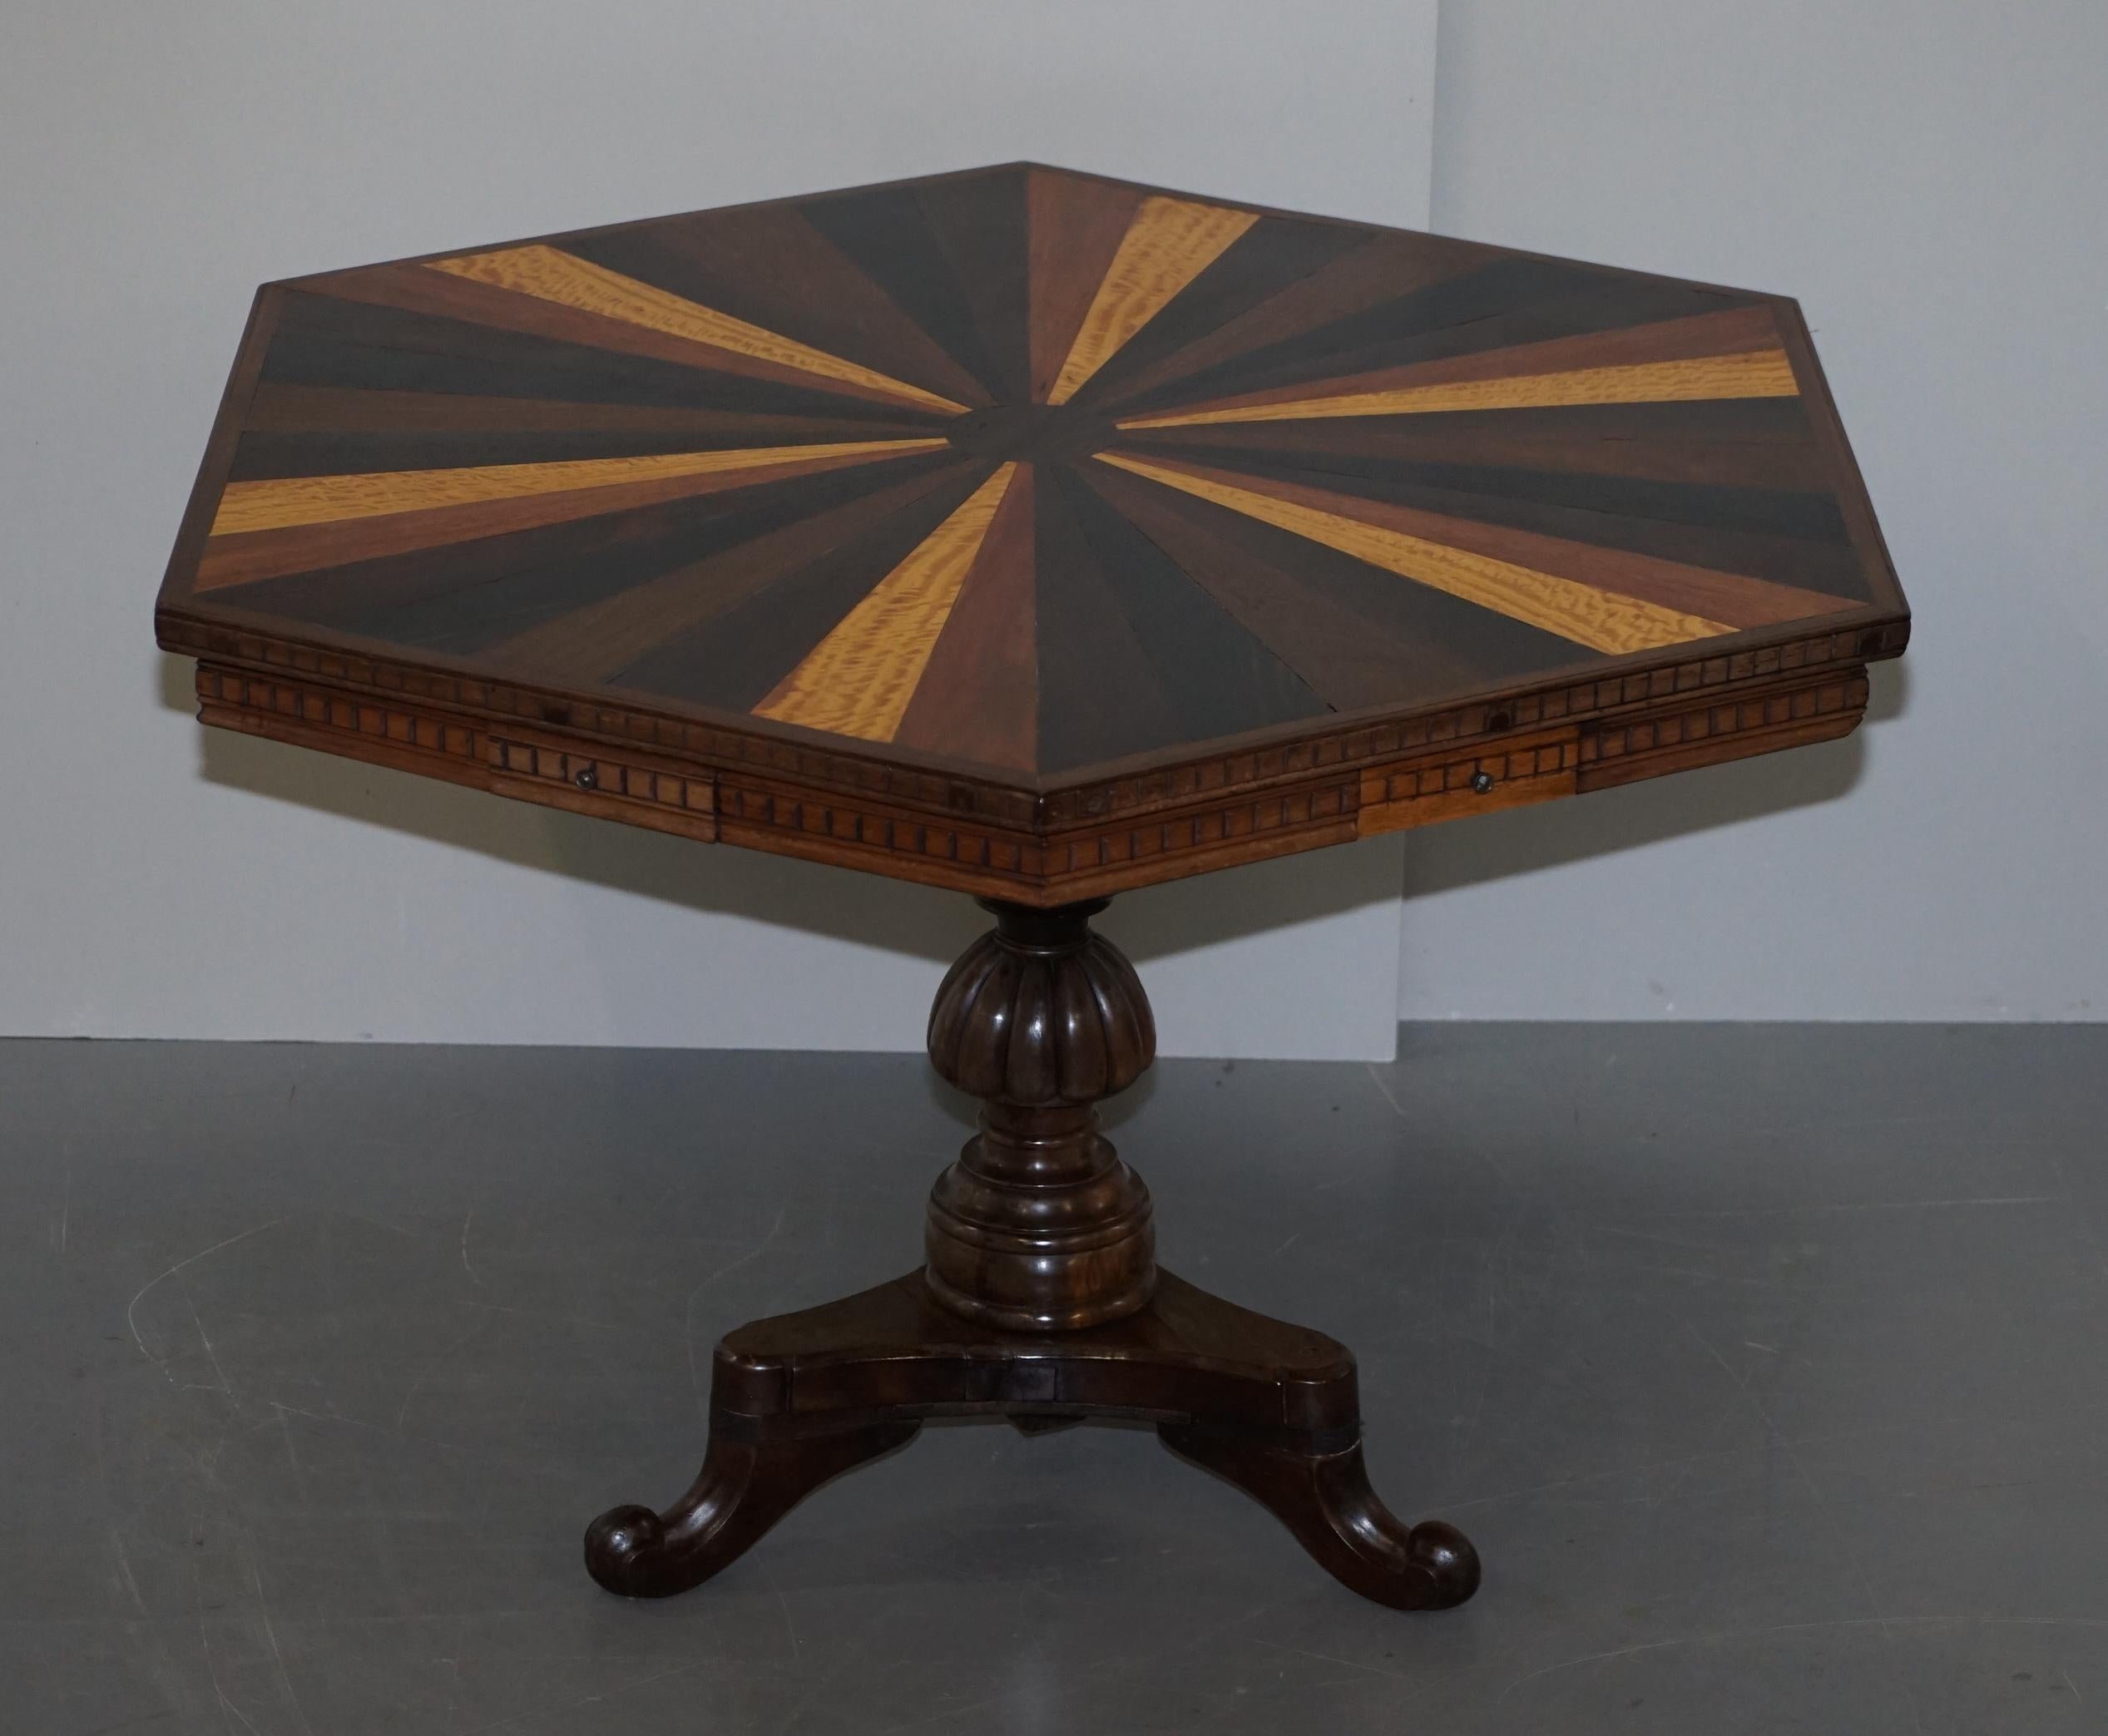 We are delighted to offer for sale this absolutely glorious Anglo-Indian Specimen wood occasional centre table

A very fine and rare table, most likely Sri Lankan Galle district in the mid 19th century. The piece various cuts of timber, ebony and